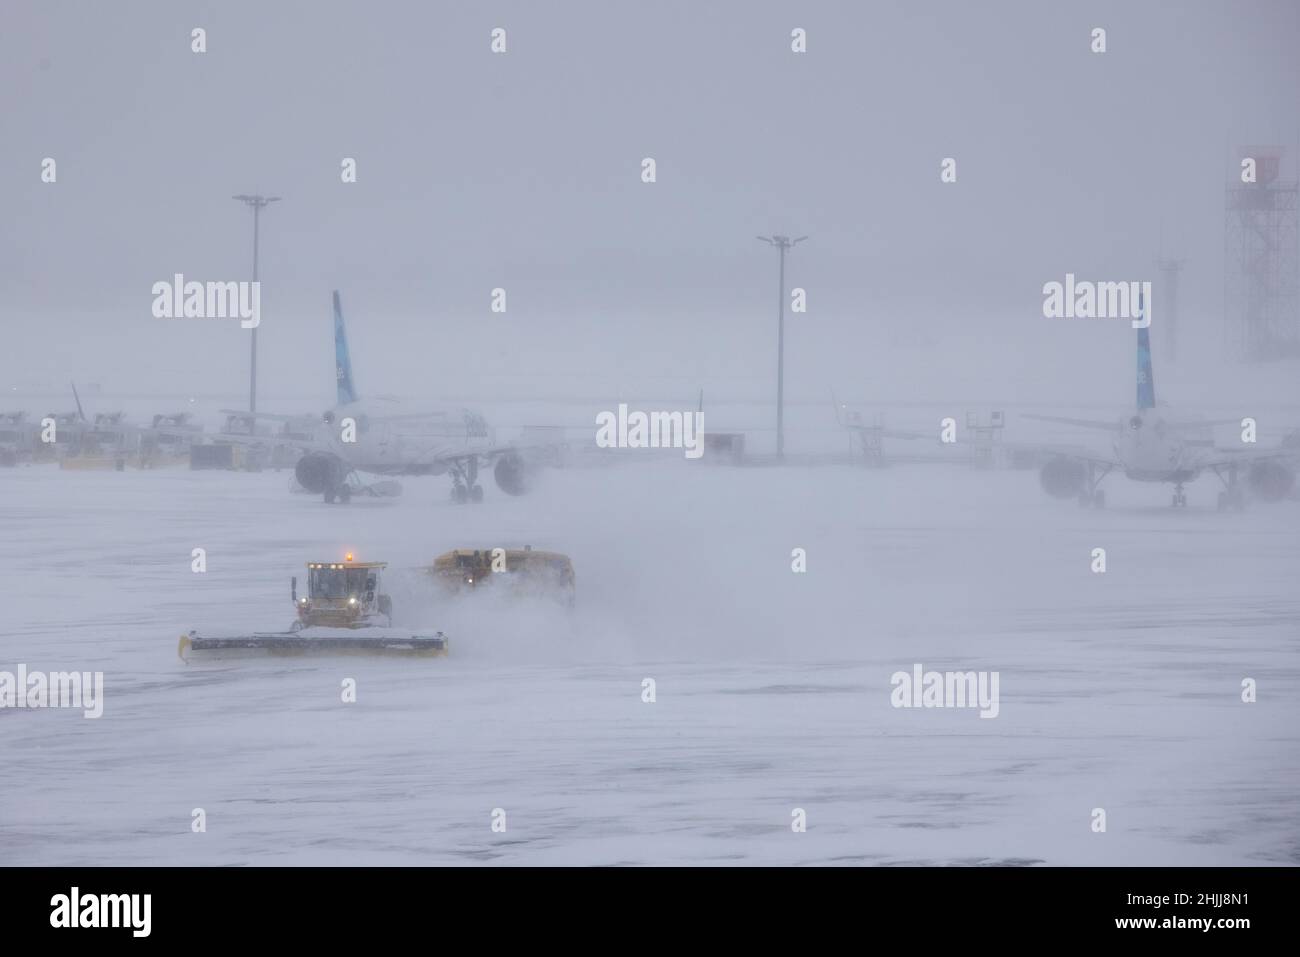 (220130) -- NEW YORK, Jan. 30, 2022 (Xinhua) -- Snow plows work at John F. Kennedy International Airport in New York, the United States, Jan. 29, 2022. Winter storm Kenan is bringing heavy snow and wind gusts to New York City and surrounding areas on Saturday. Snowfall at John F. Kennedy International Airport exceeded 5 inches in the last 12 hours, said a tweet from the National Weather Service at 9 a.m. on Saturday. As much as 460 flights from John F. Kennedy International Airport were canceled accounting for 80 percent of the total, according to travel information platform flightaware.c Stock Photo